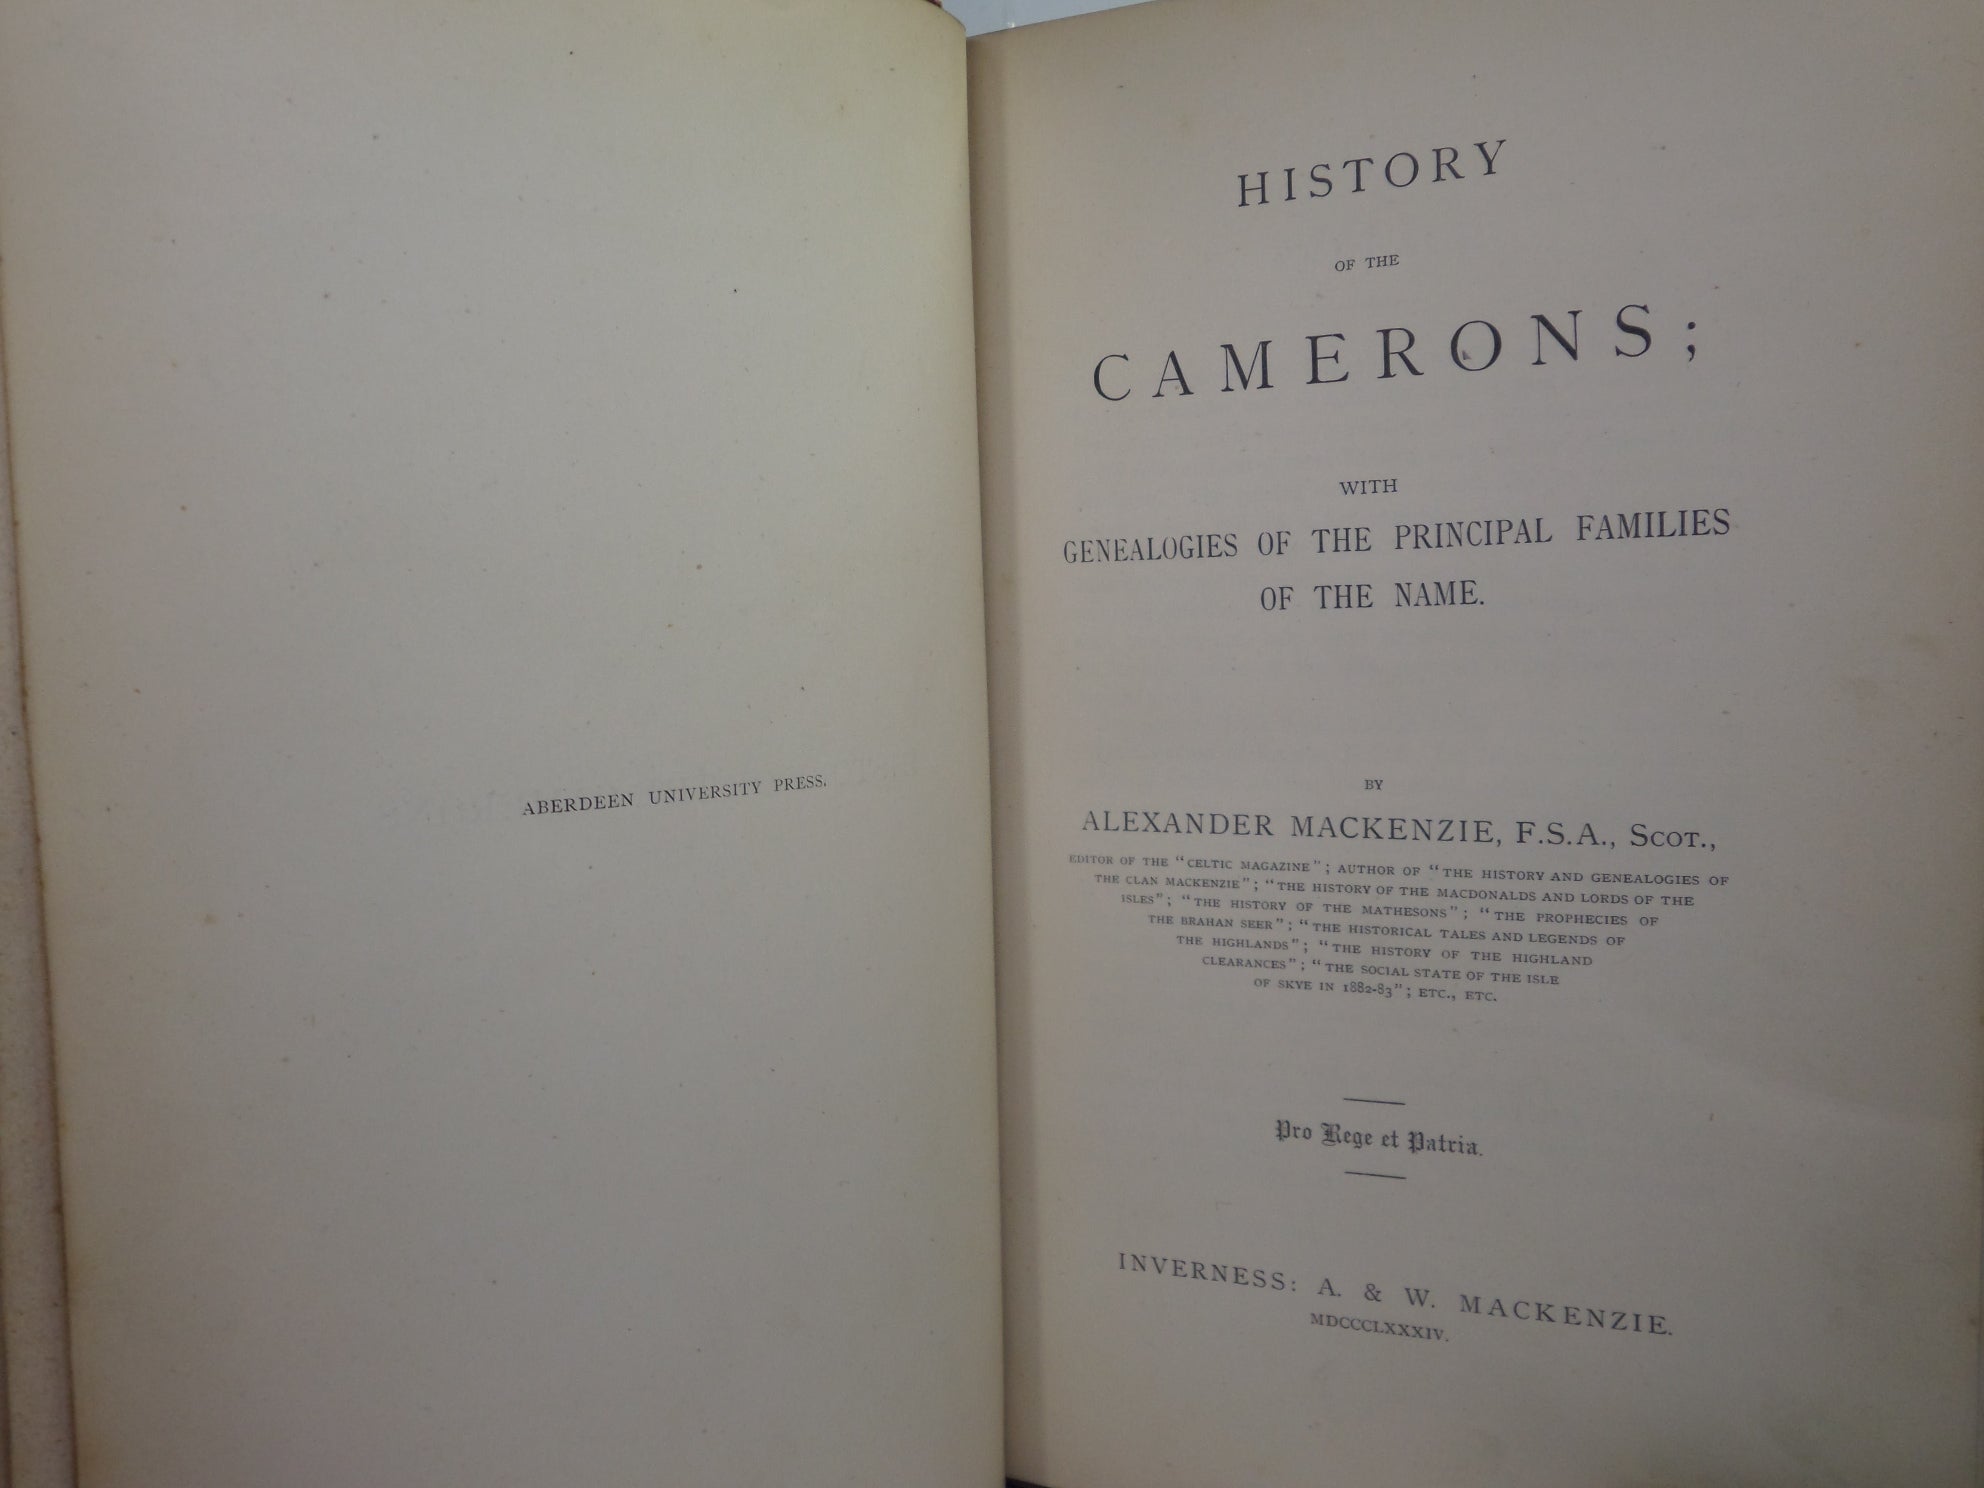 HISTORY OF THE CAMERONS BY ALEXANDER MACKENZIE 1884 LEATHER-BOUND FIRST EDITION